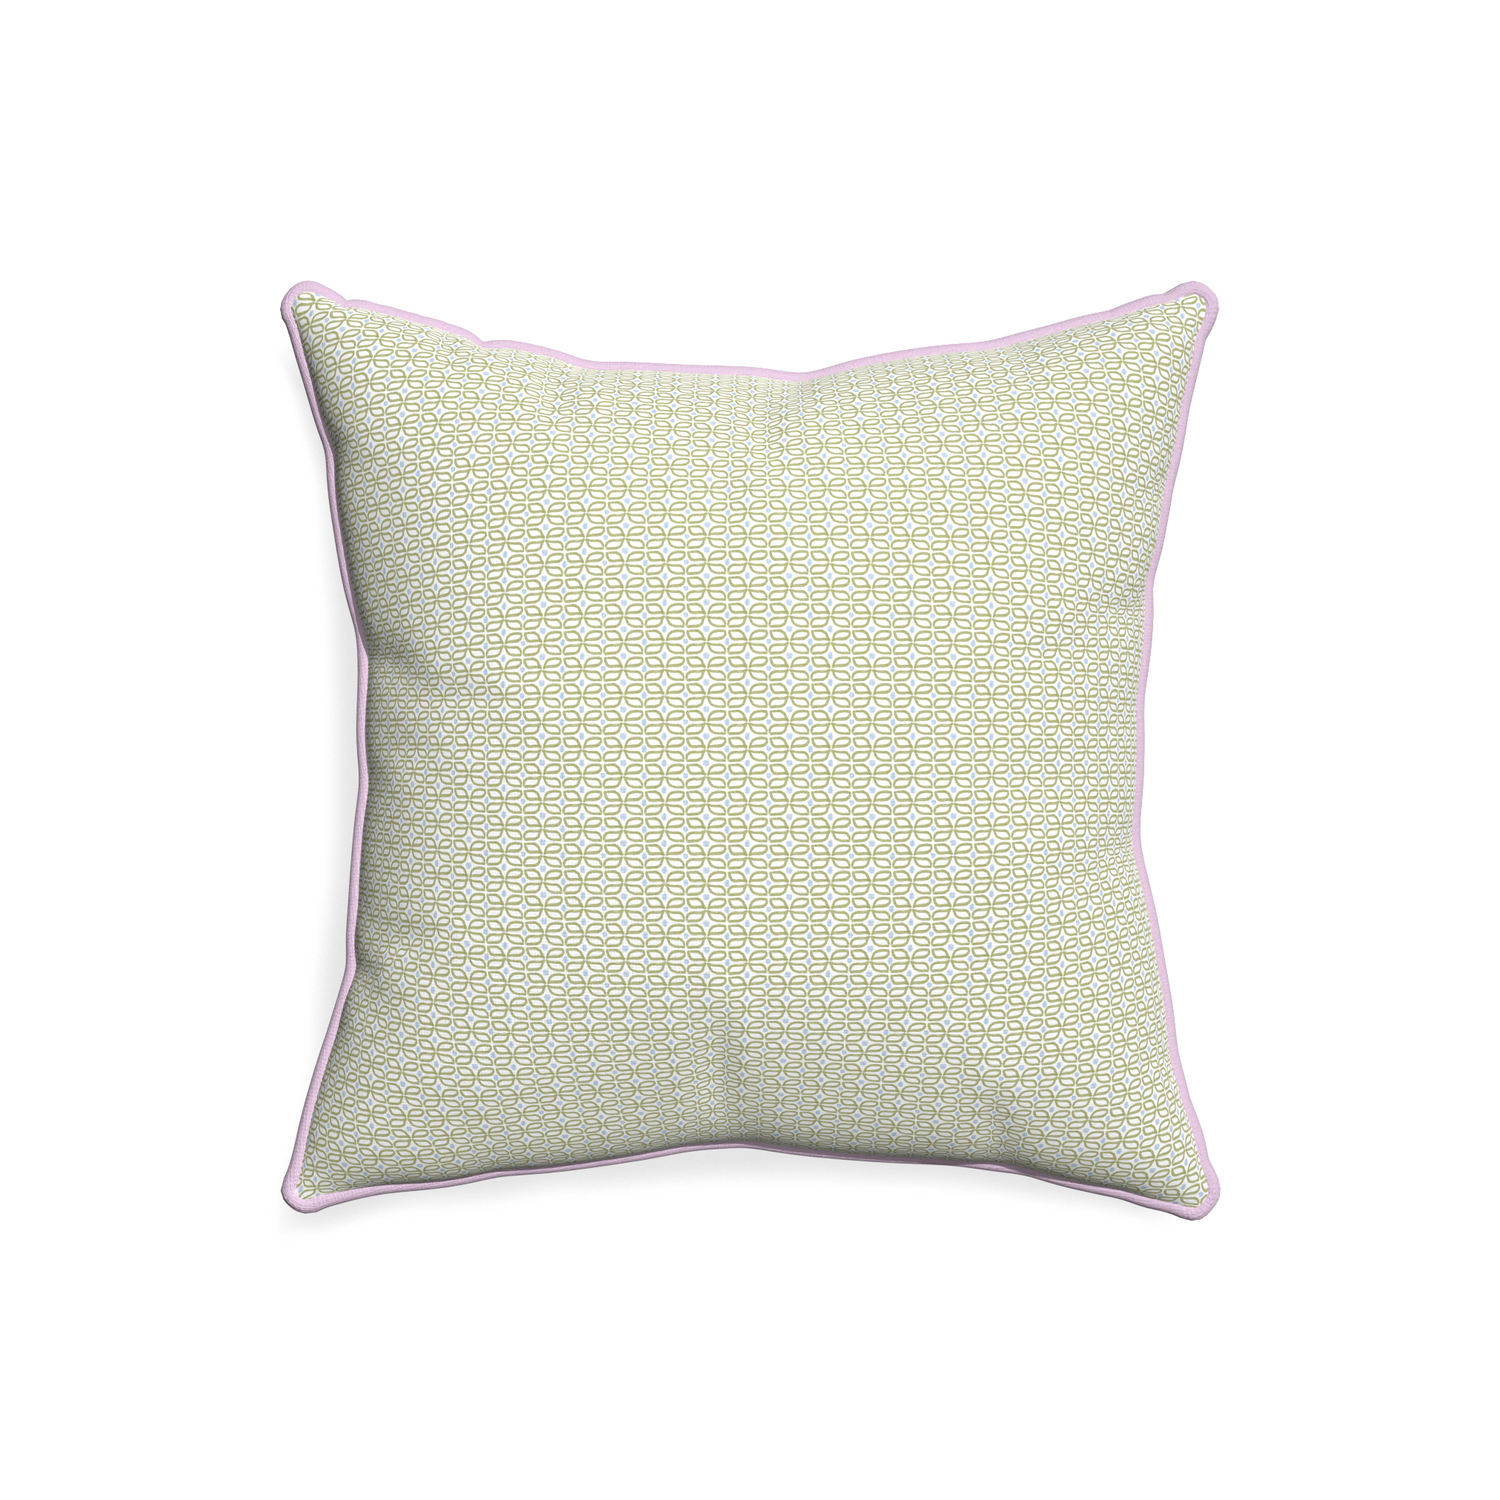 20-square loomi moss custom pillow with l piping on white background